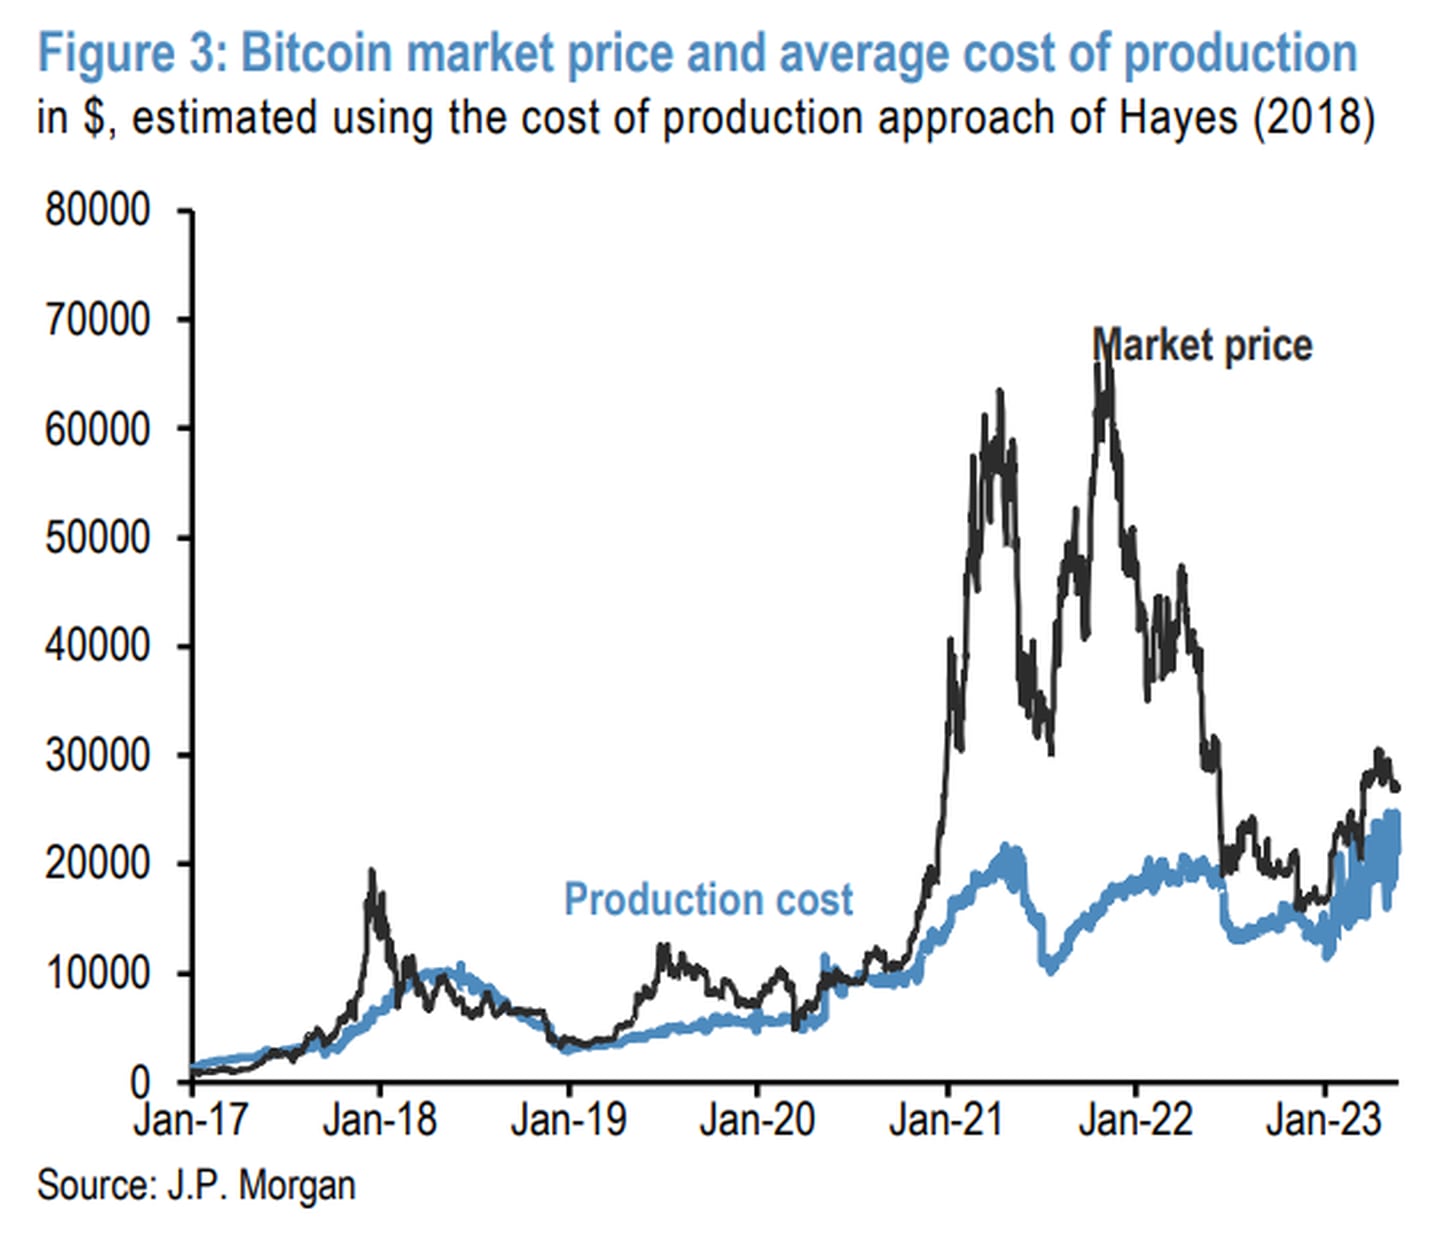 JPMorgan analysis of Bitcoin's market price and average cost of production